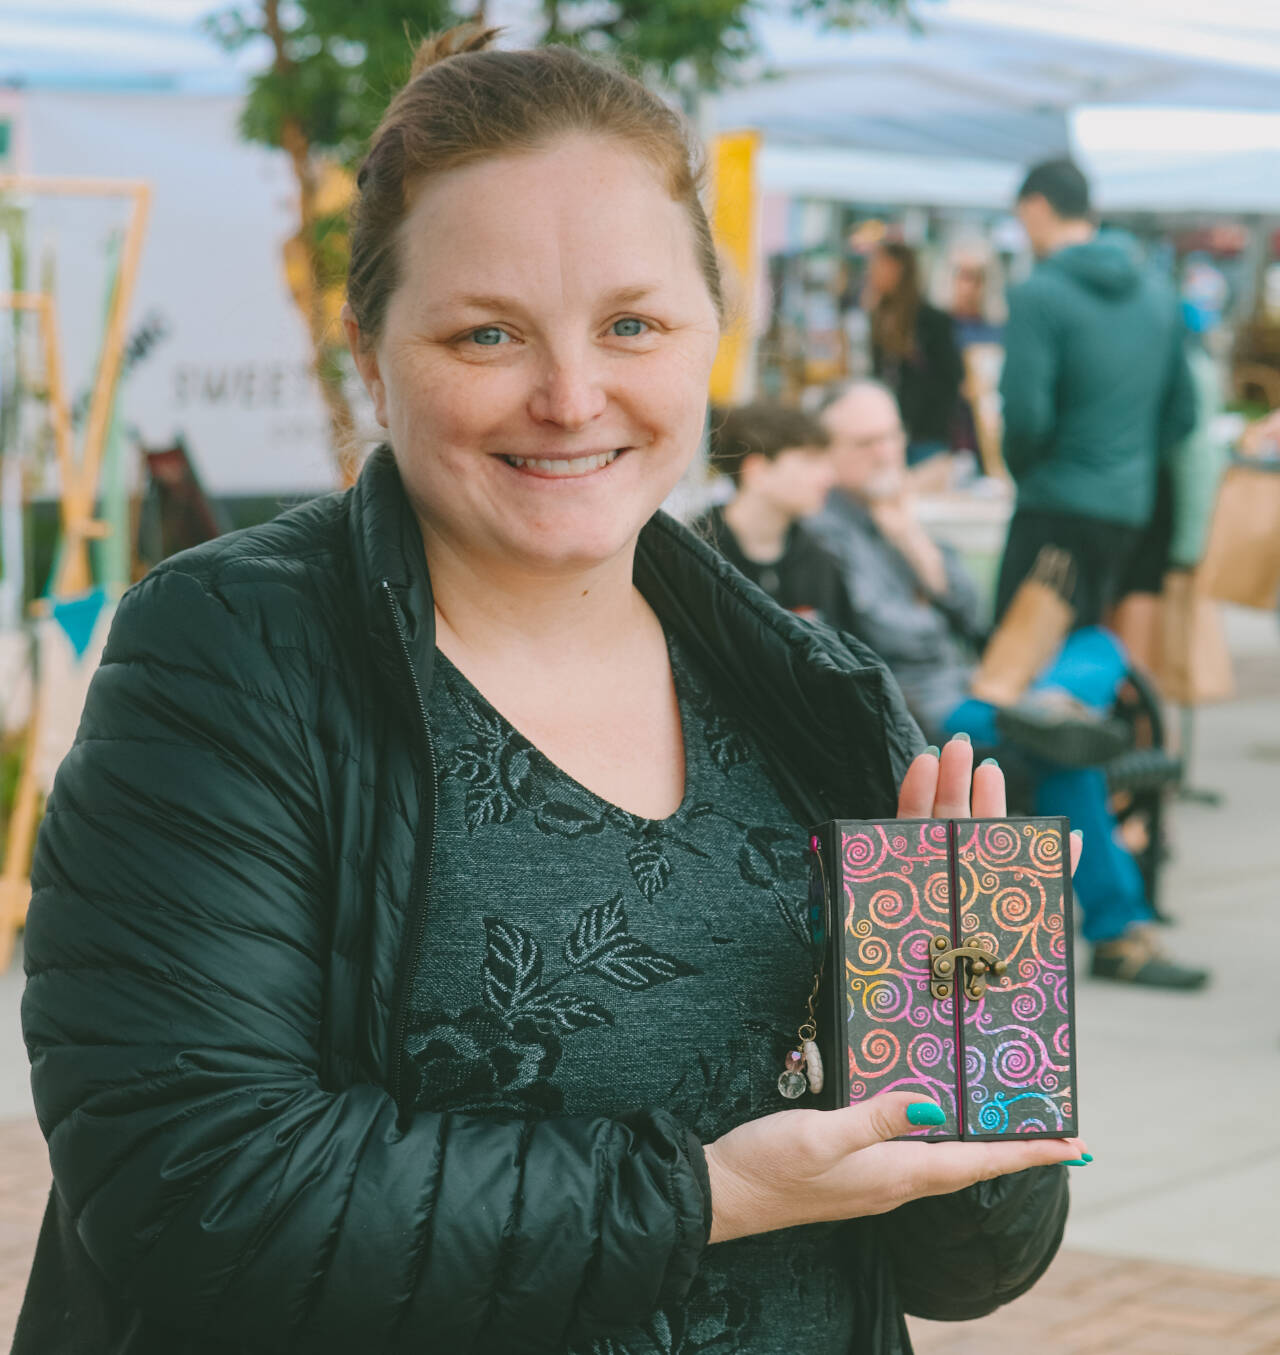 PhotoS courtesy of Sequim Farmers & Artisans Market 
Rose Crawford displays one of her one-of-a-kind composition notebooks at the Sequim Farmers & Artisans Market.